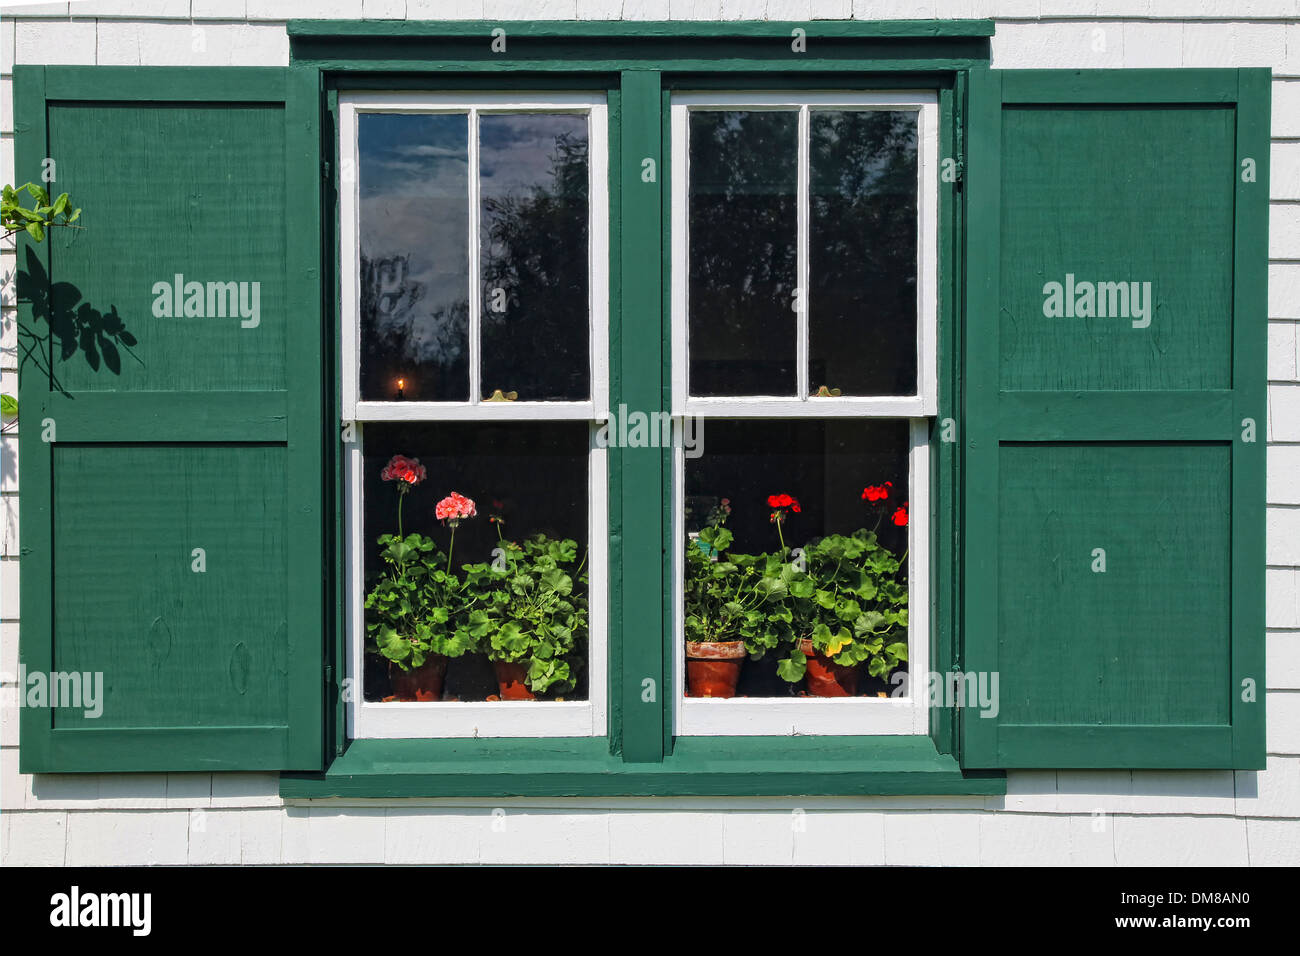 Pots of flowering geraniums in the window of Green Gables House, made famous by the Anne of Green Gables books by L.M. Montgomey Stock Photo